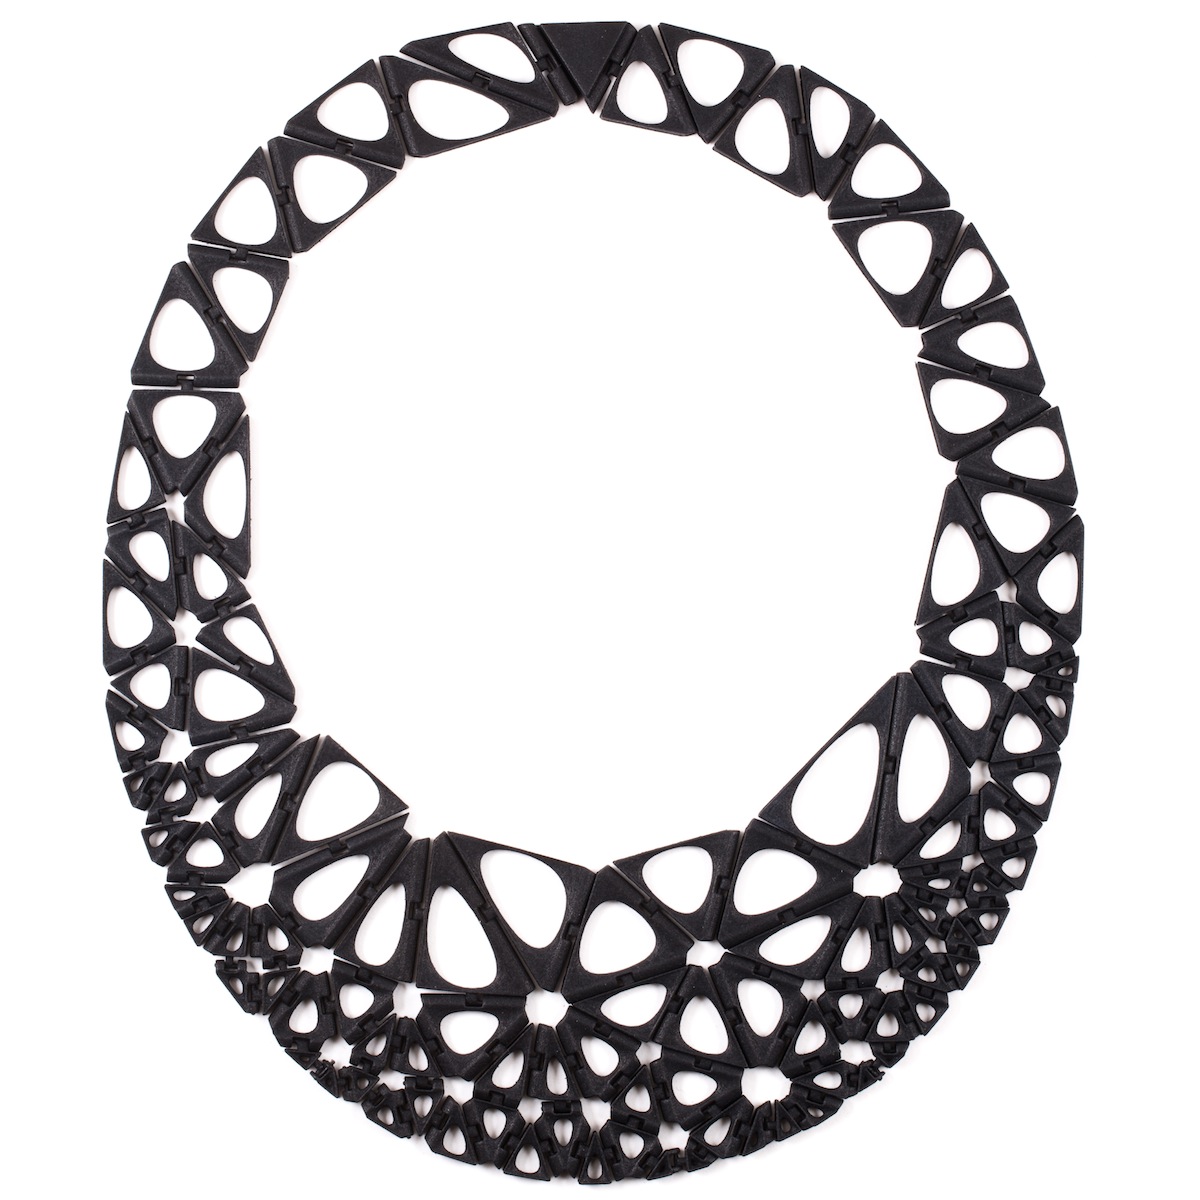 A 3D-printed necklace from nervous System